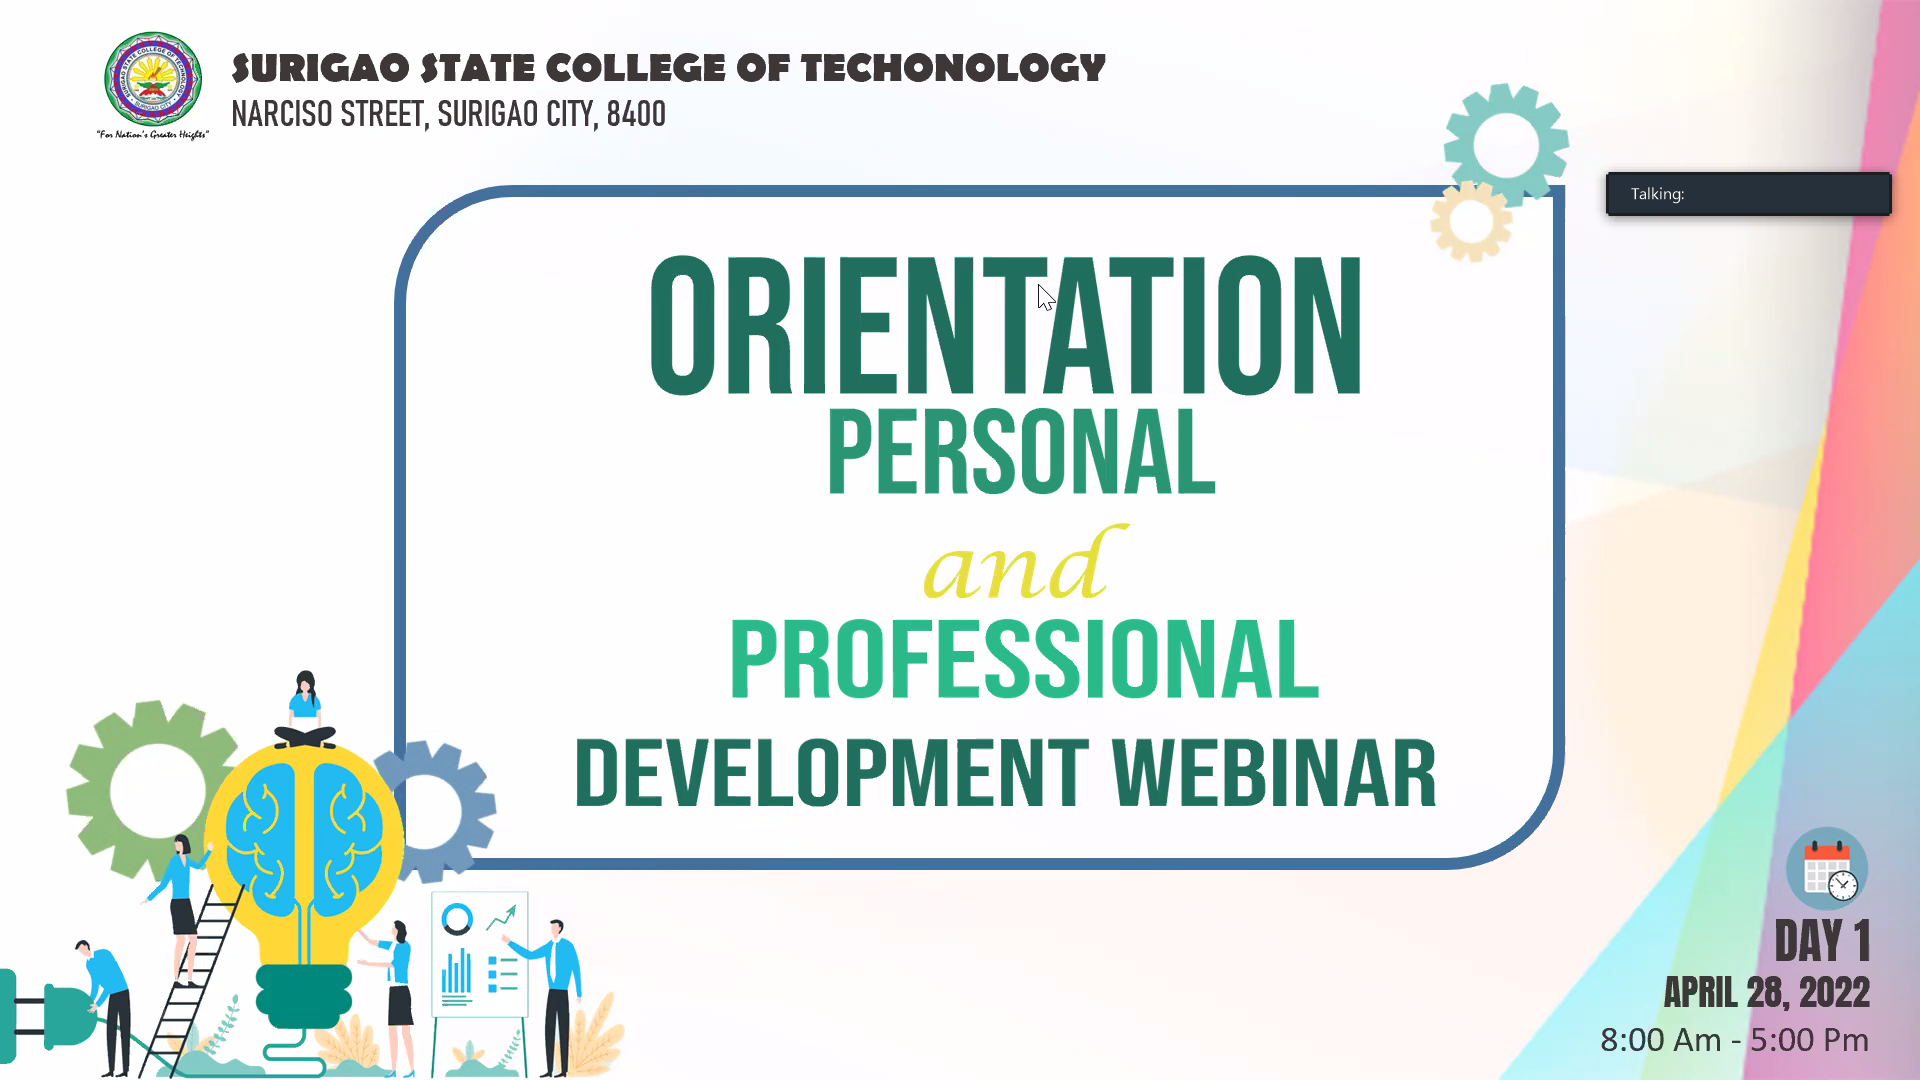 SSCT Conducts Personal and Professional Development Webinar for Faculty and Staff